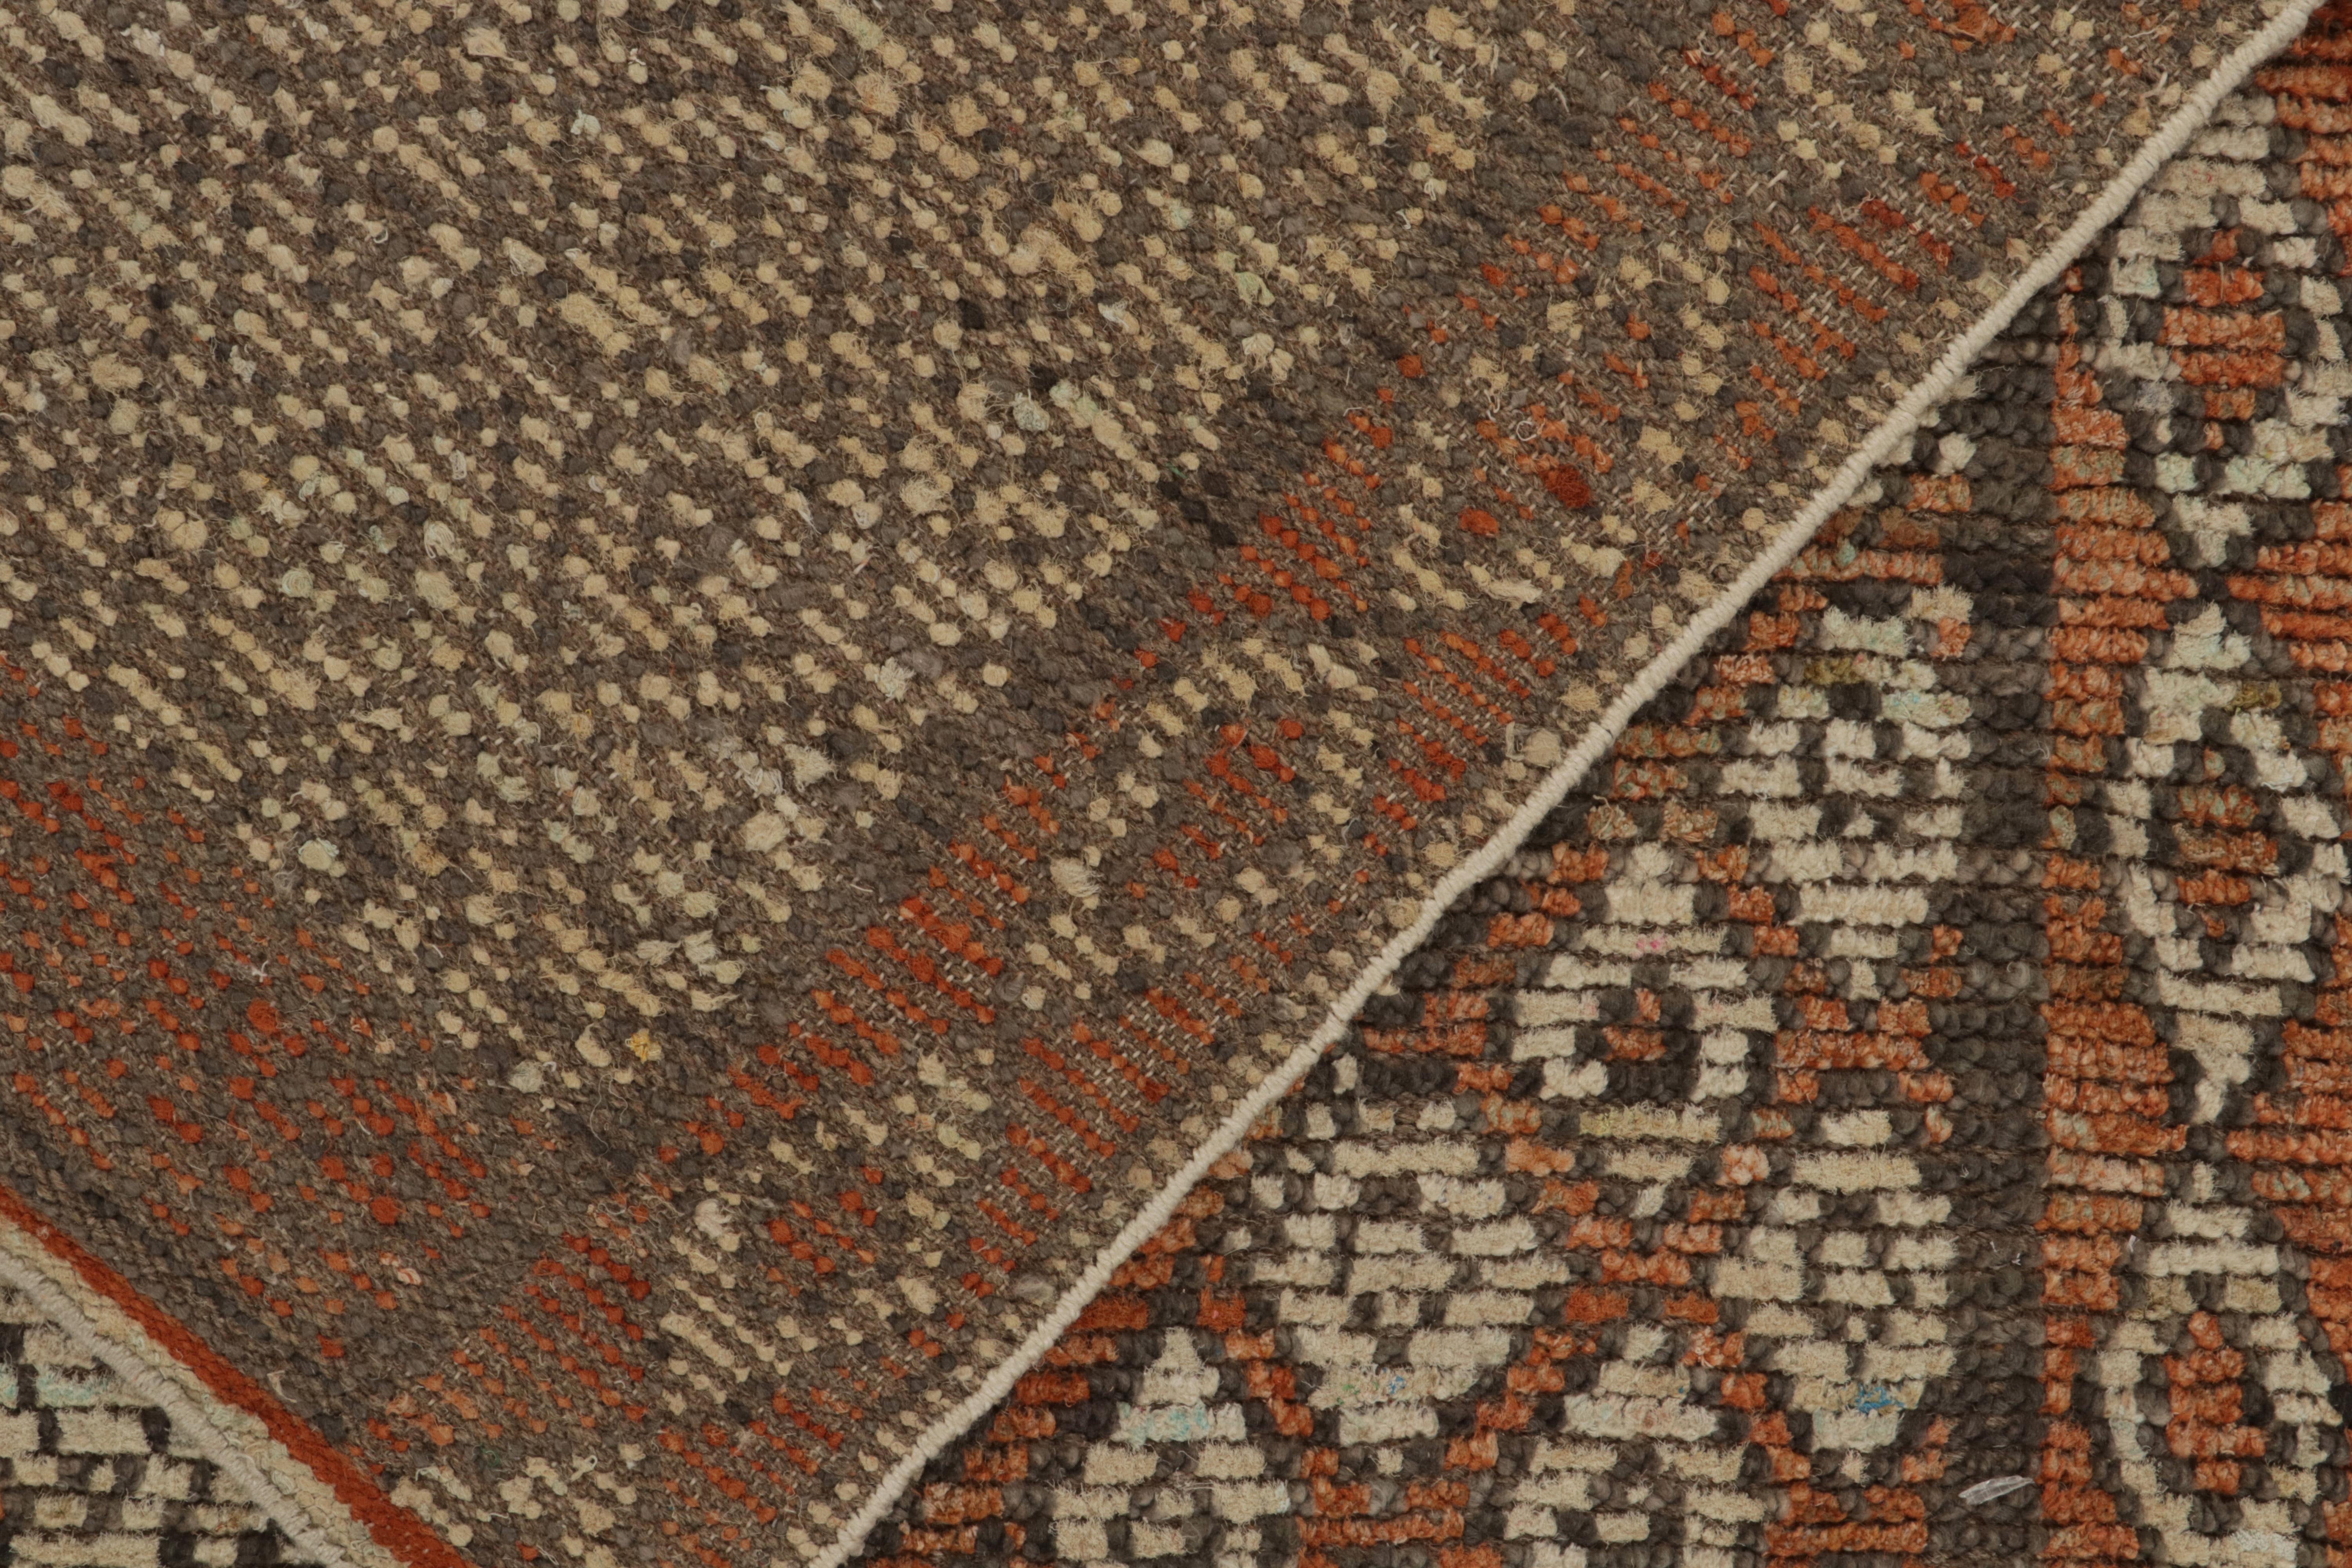 Rug & Kilim’s Moroccan Style Rug in Orange, White & Beige-Brown Diamond Patterns In New Condition For Sale In Long Island City, NY